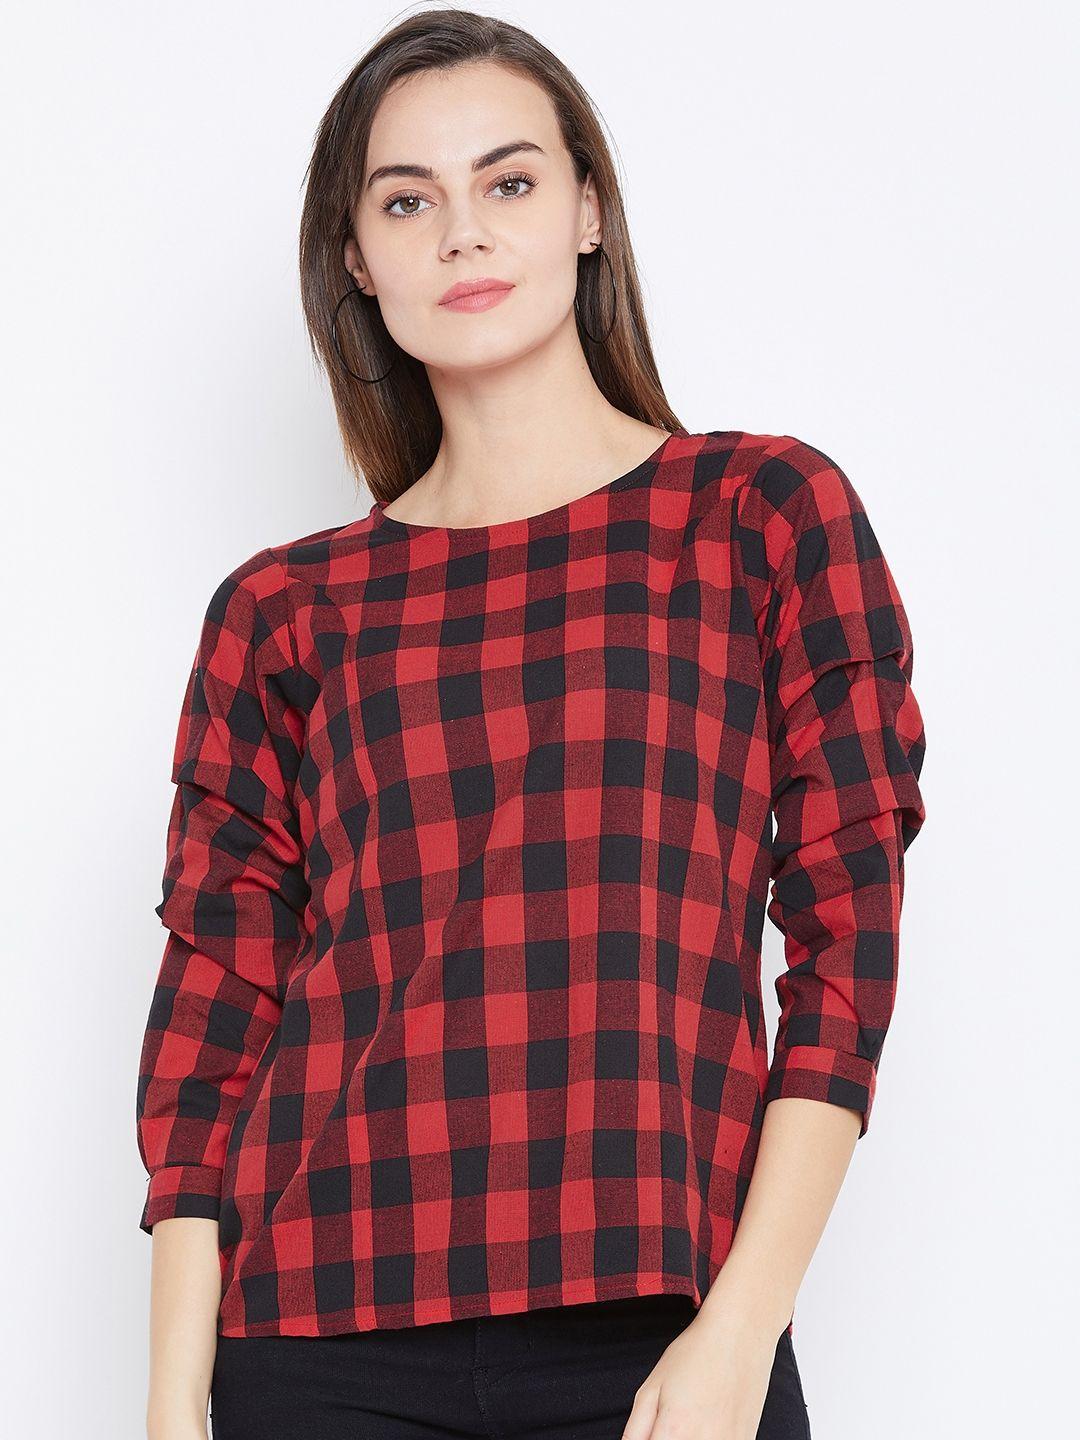 one femme women red & black checked pure cotton top